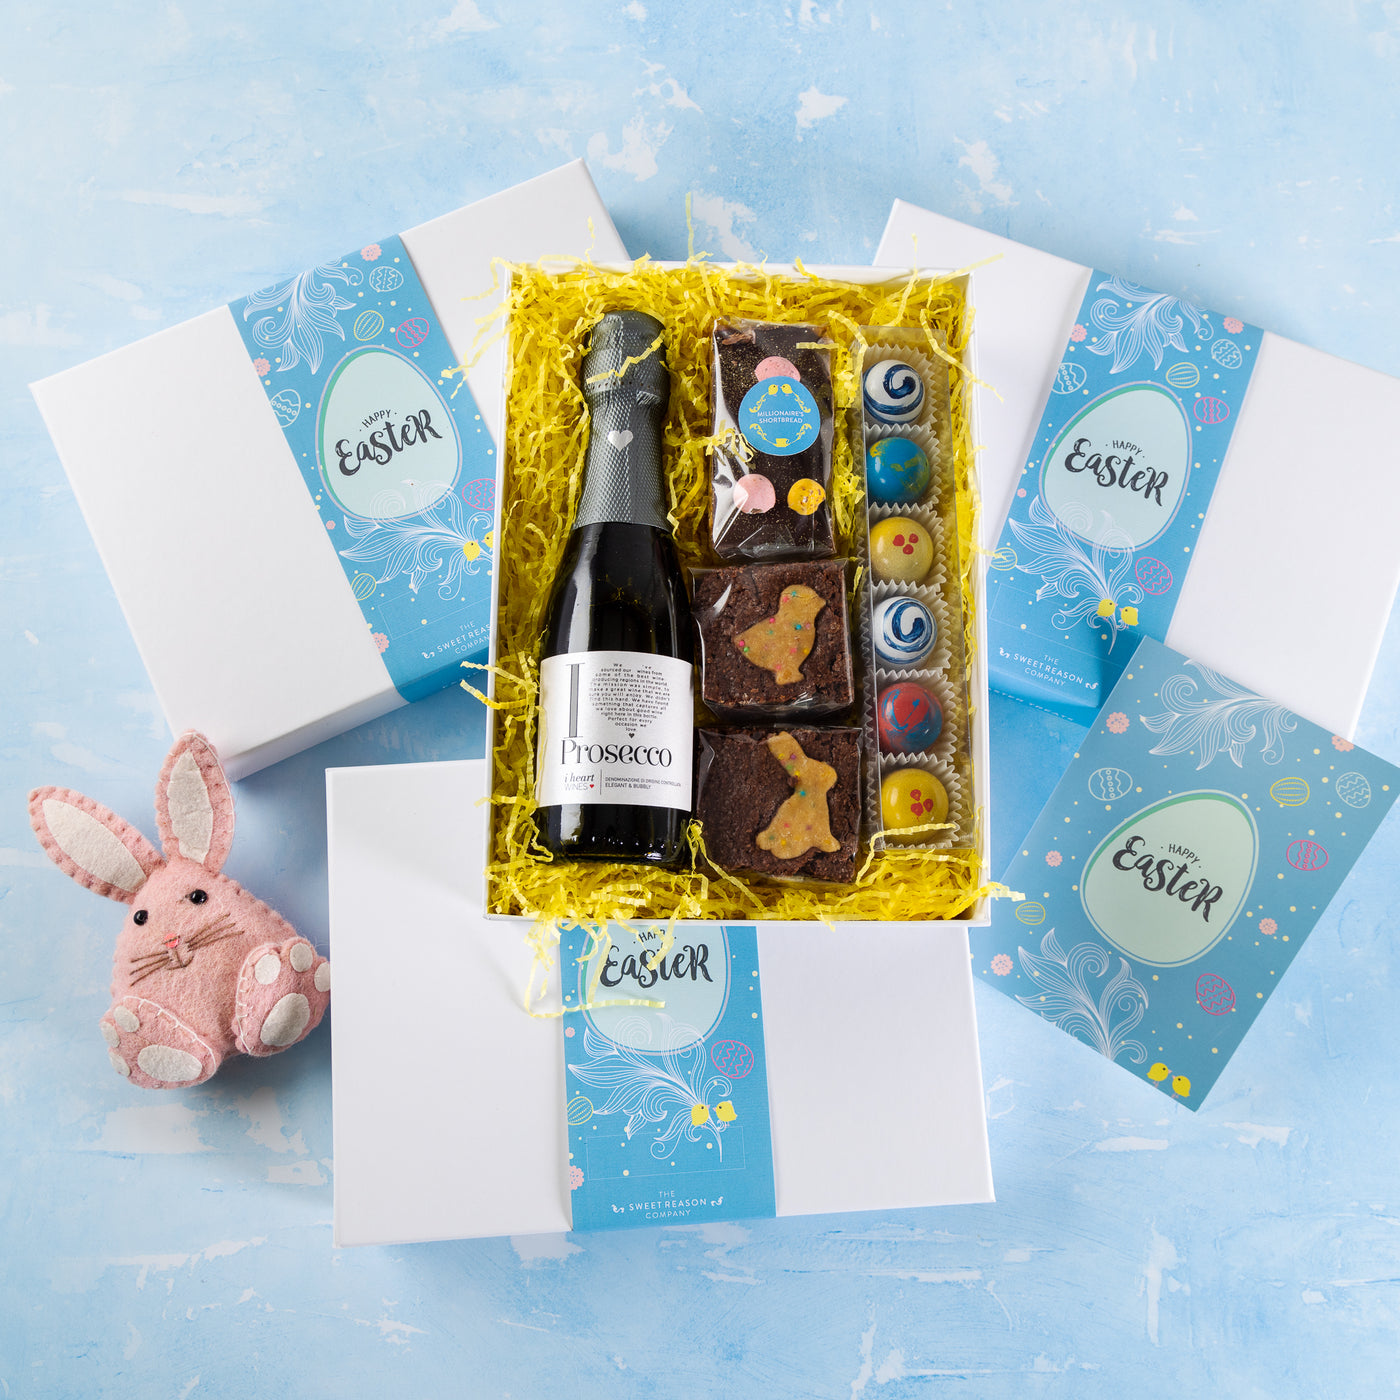 'Easter' Treats and Prosecco